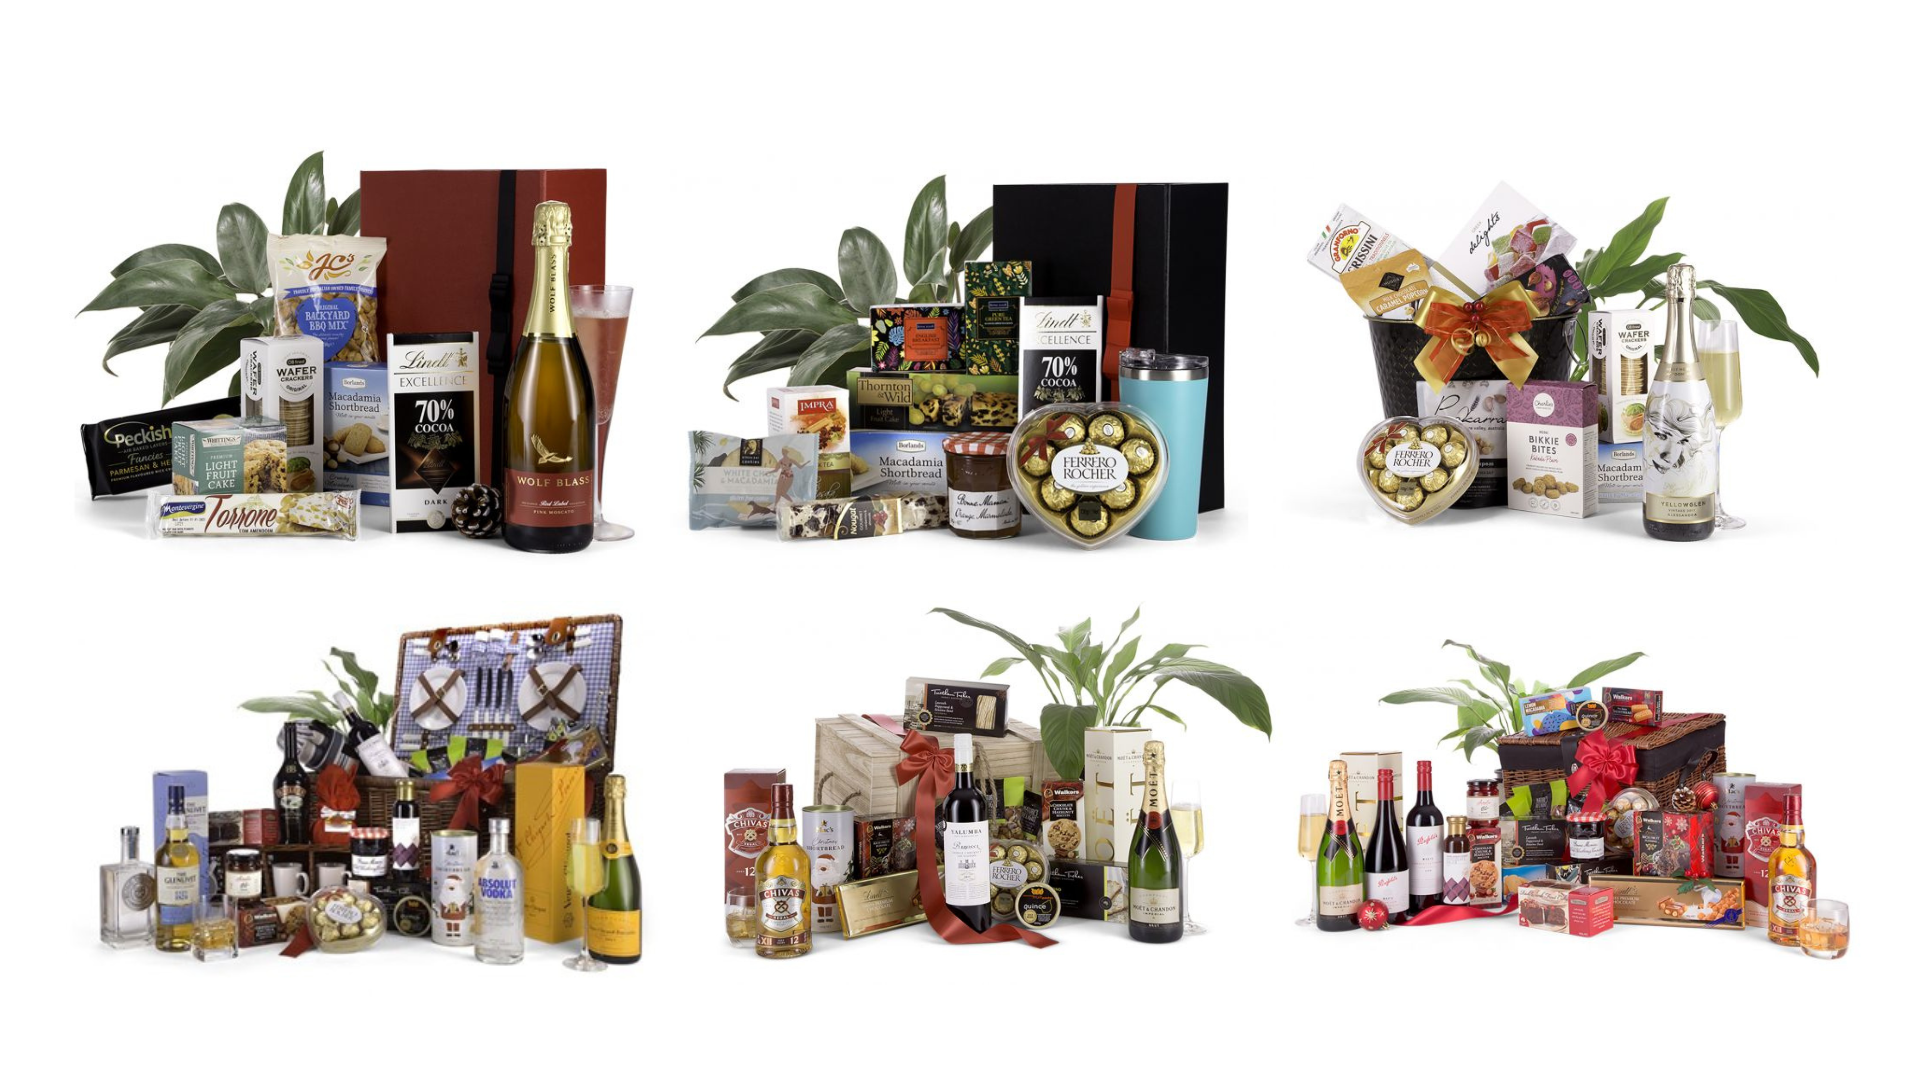 Luxury Hampers and Gourmet Gift Baskets | hampers.com